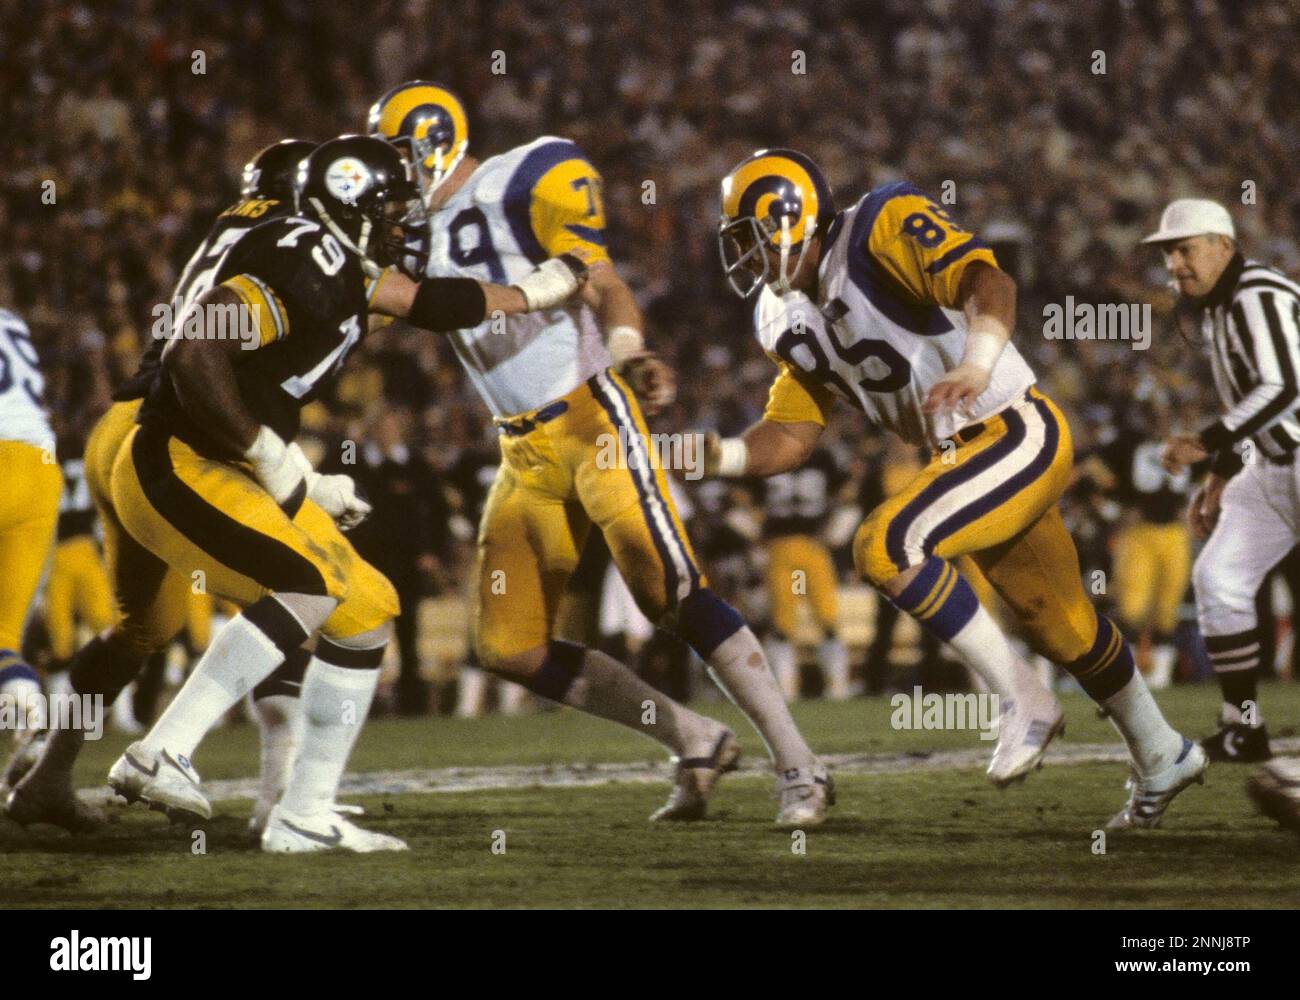 20 January 1980: Super Bowl XIV was played between AFC champion Pittsburgh  Steelers and NFC champion Los Angeles Rams at the Rose Bowl in Pasadena  California. Action during game - Jack Youngblood (